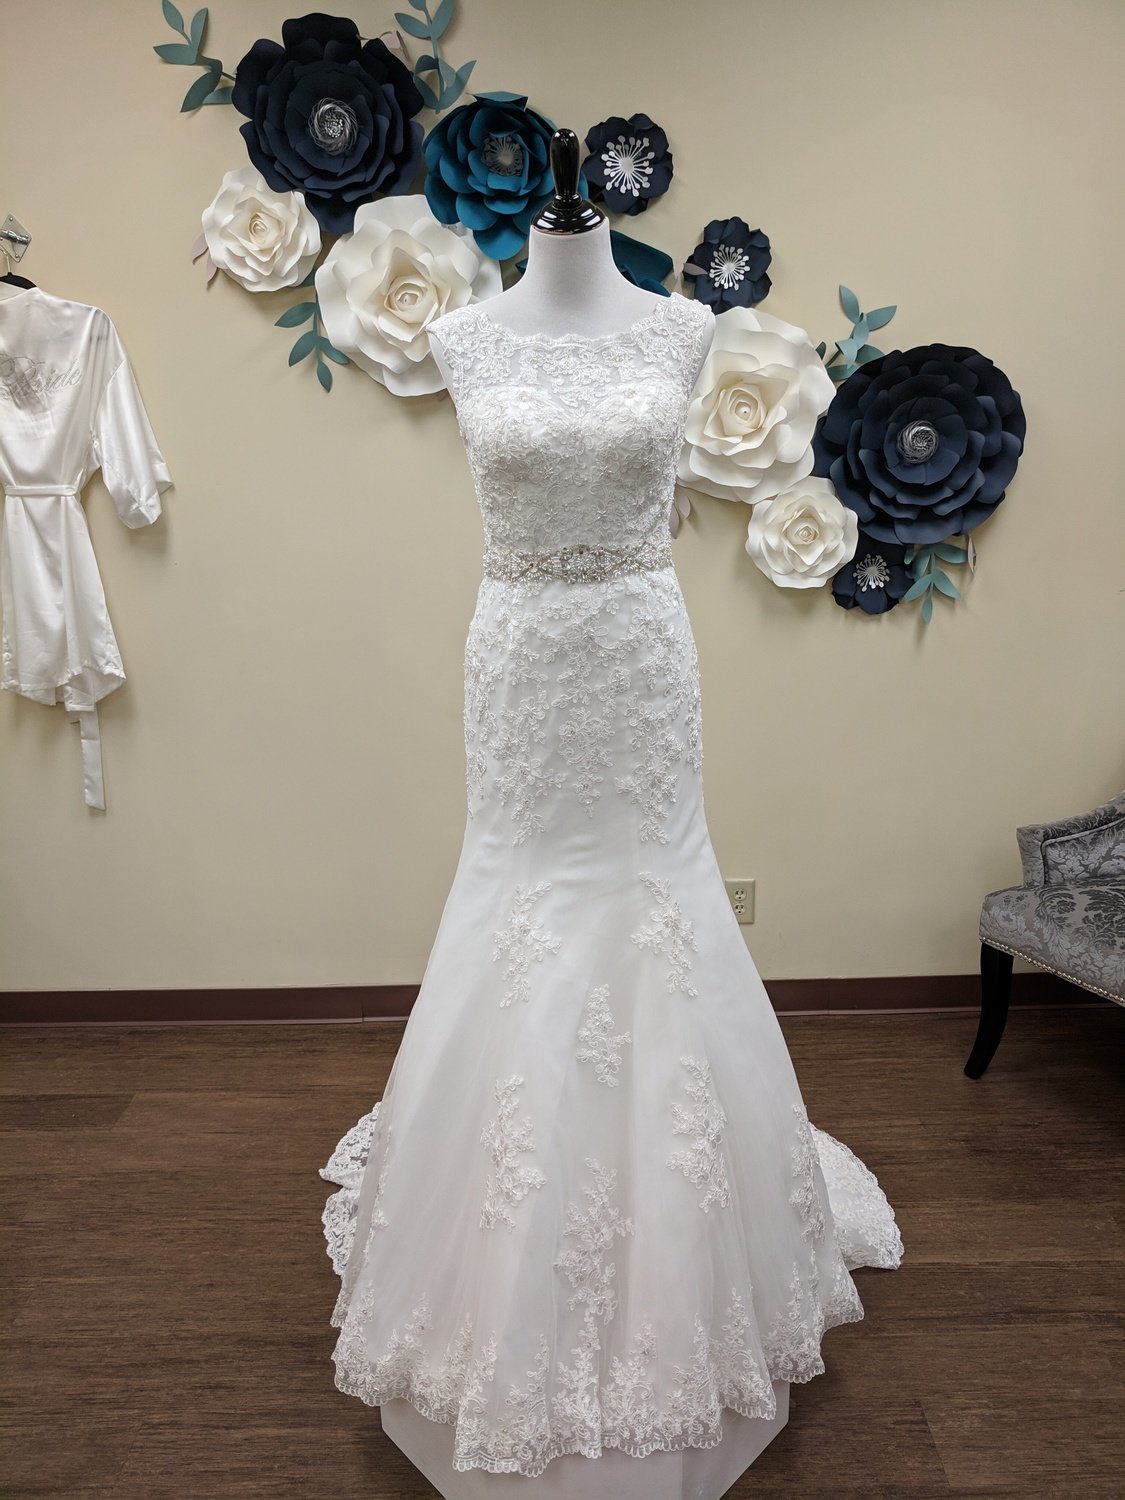 High Neck Mermaid Gown with Attached Belt Sample Size 10